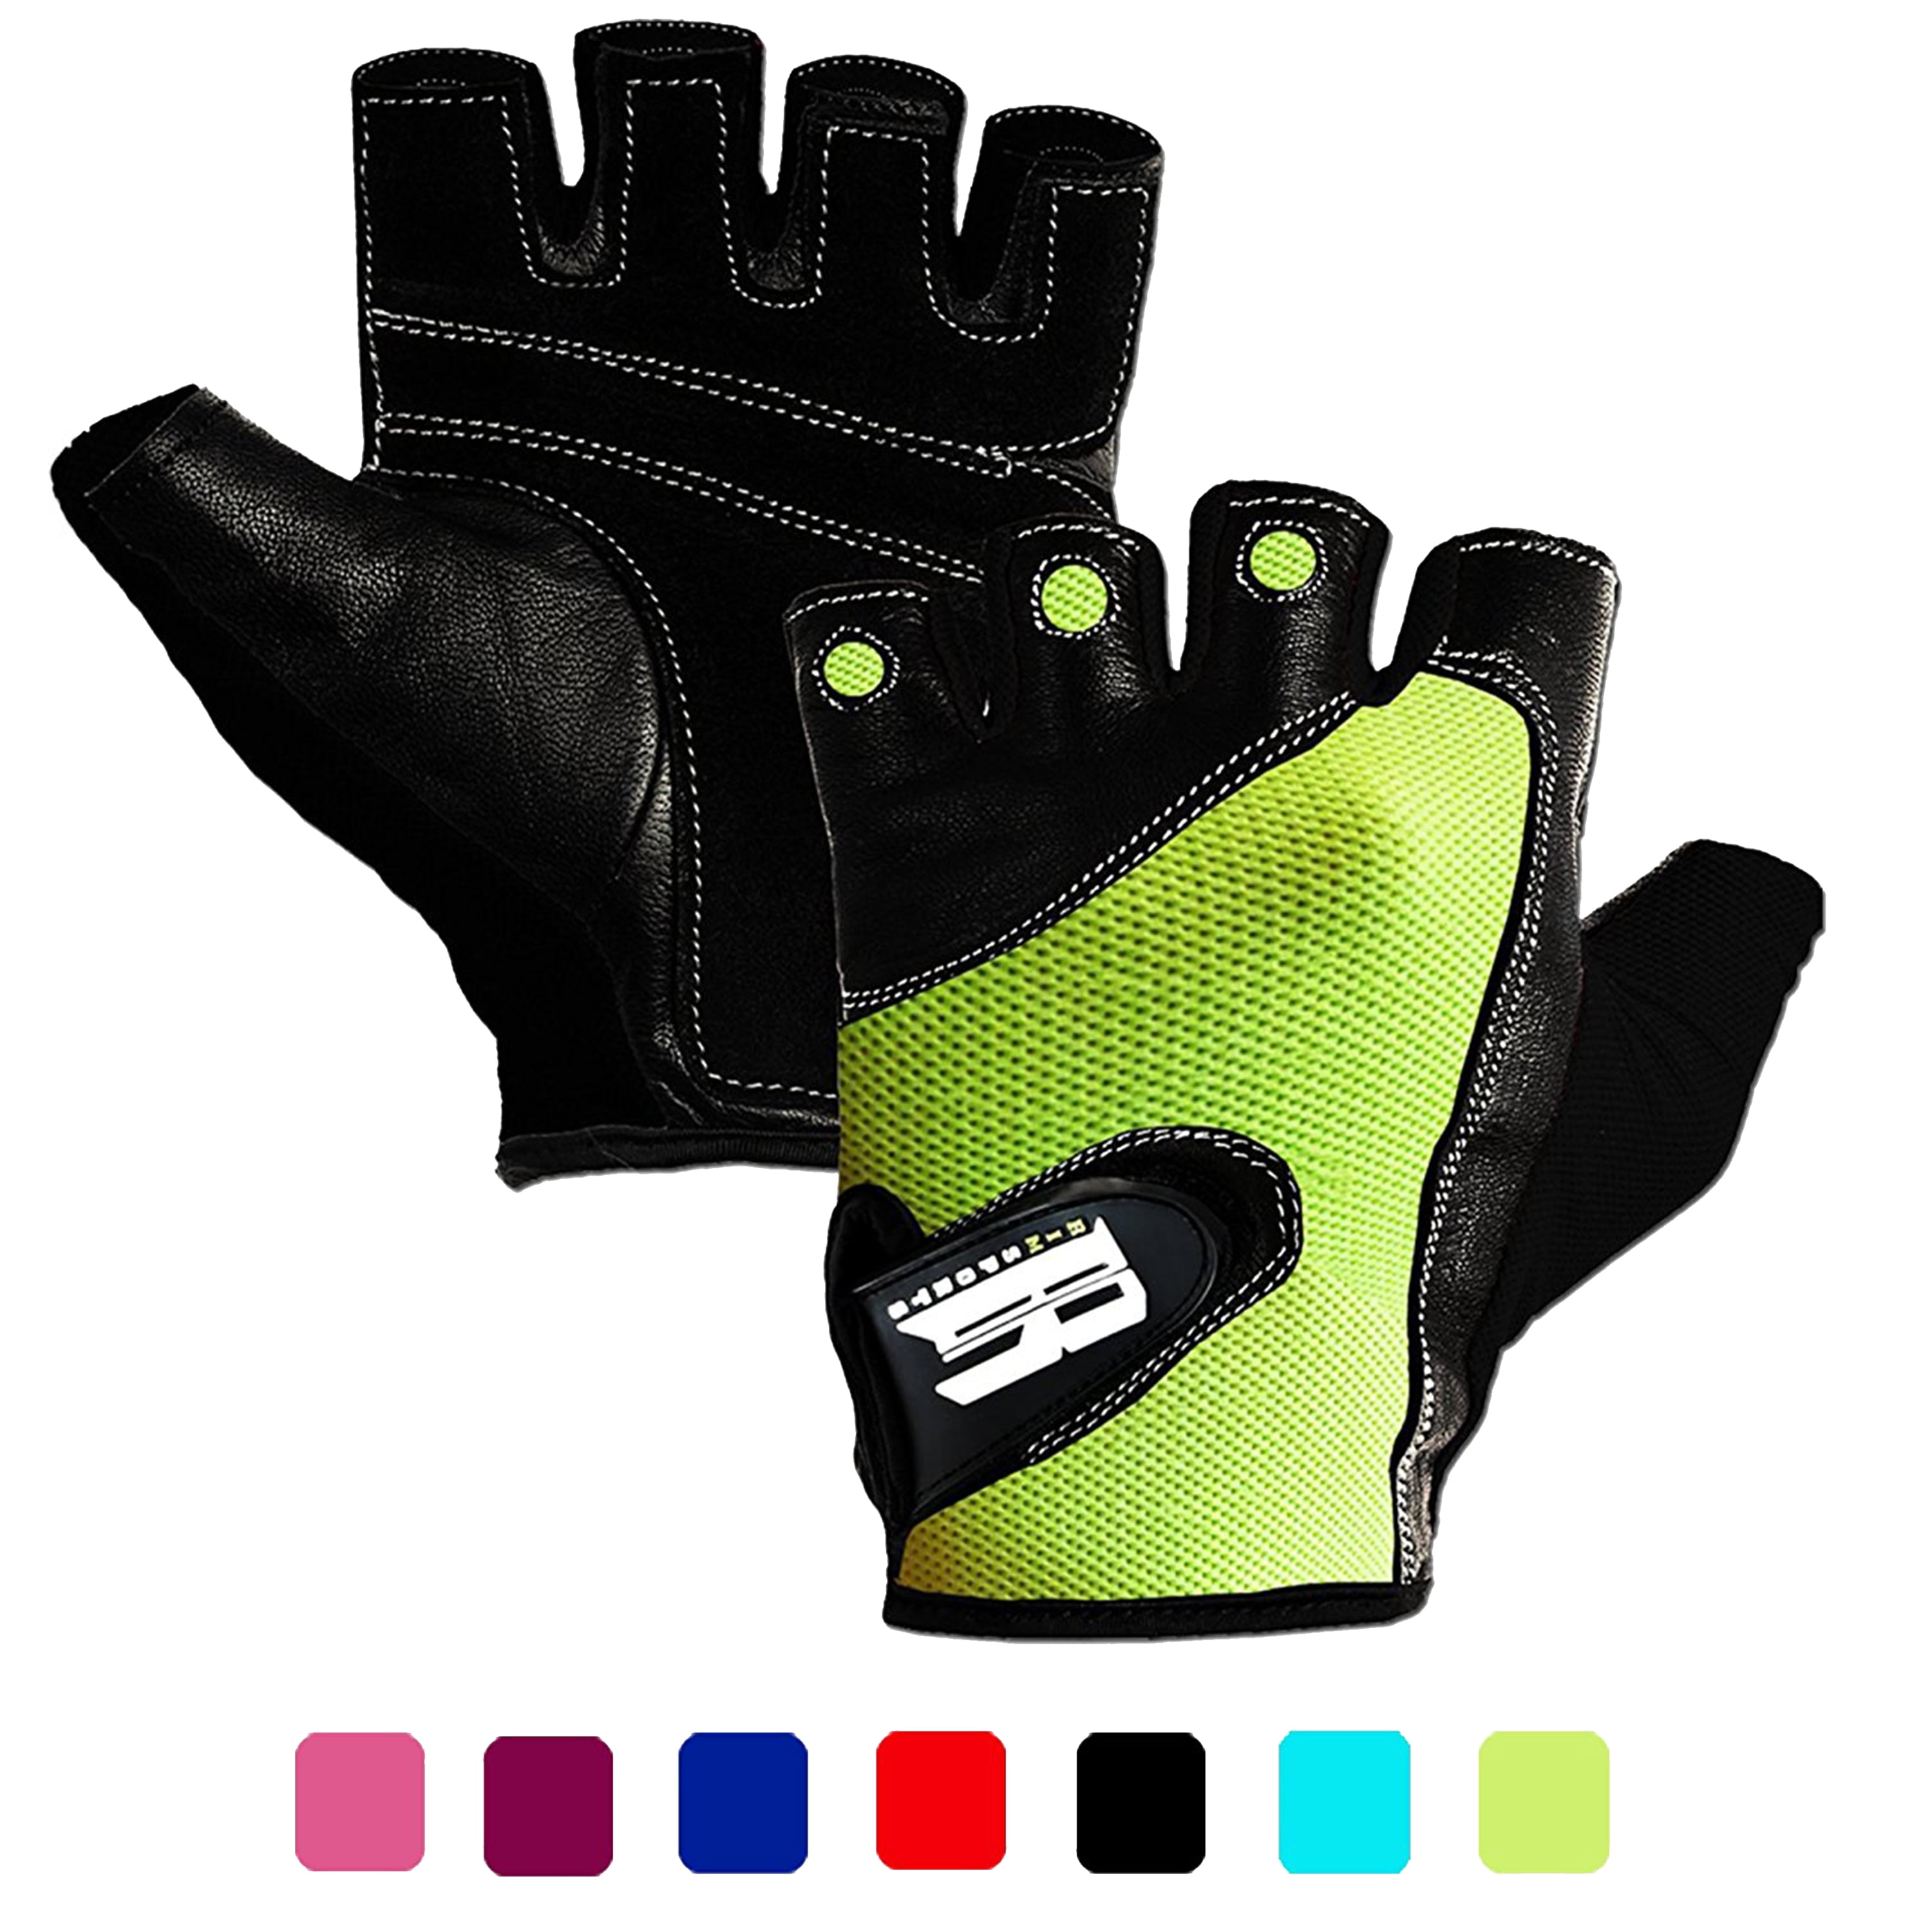 LEATHER WHEELCHAIR GLOVES FINGERLESS HALF FINGER FITNESS TRAINING WEIGHT LIFTING 